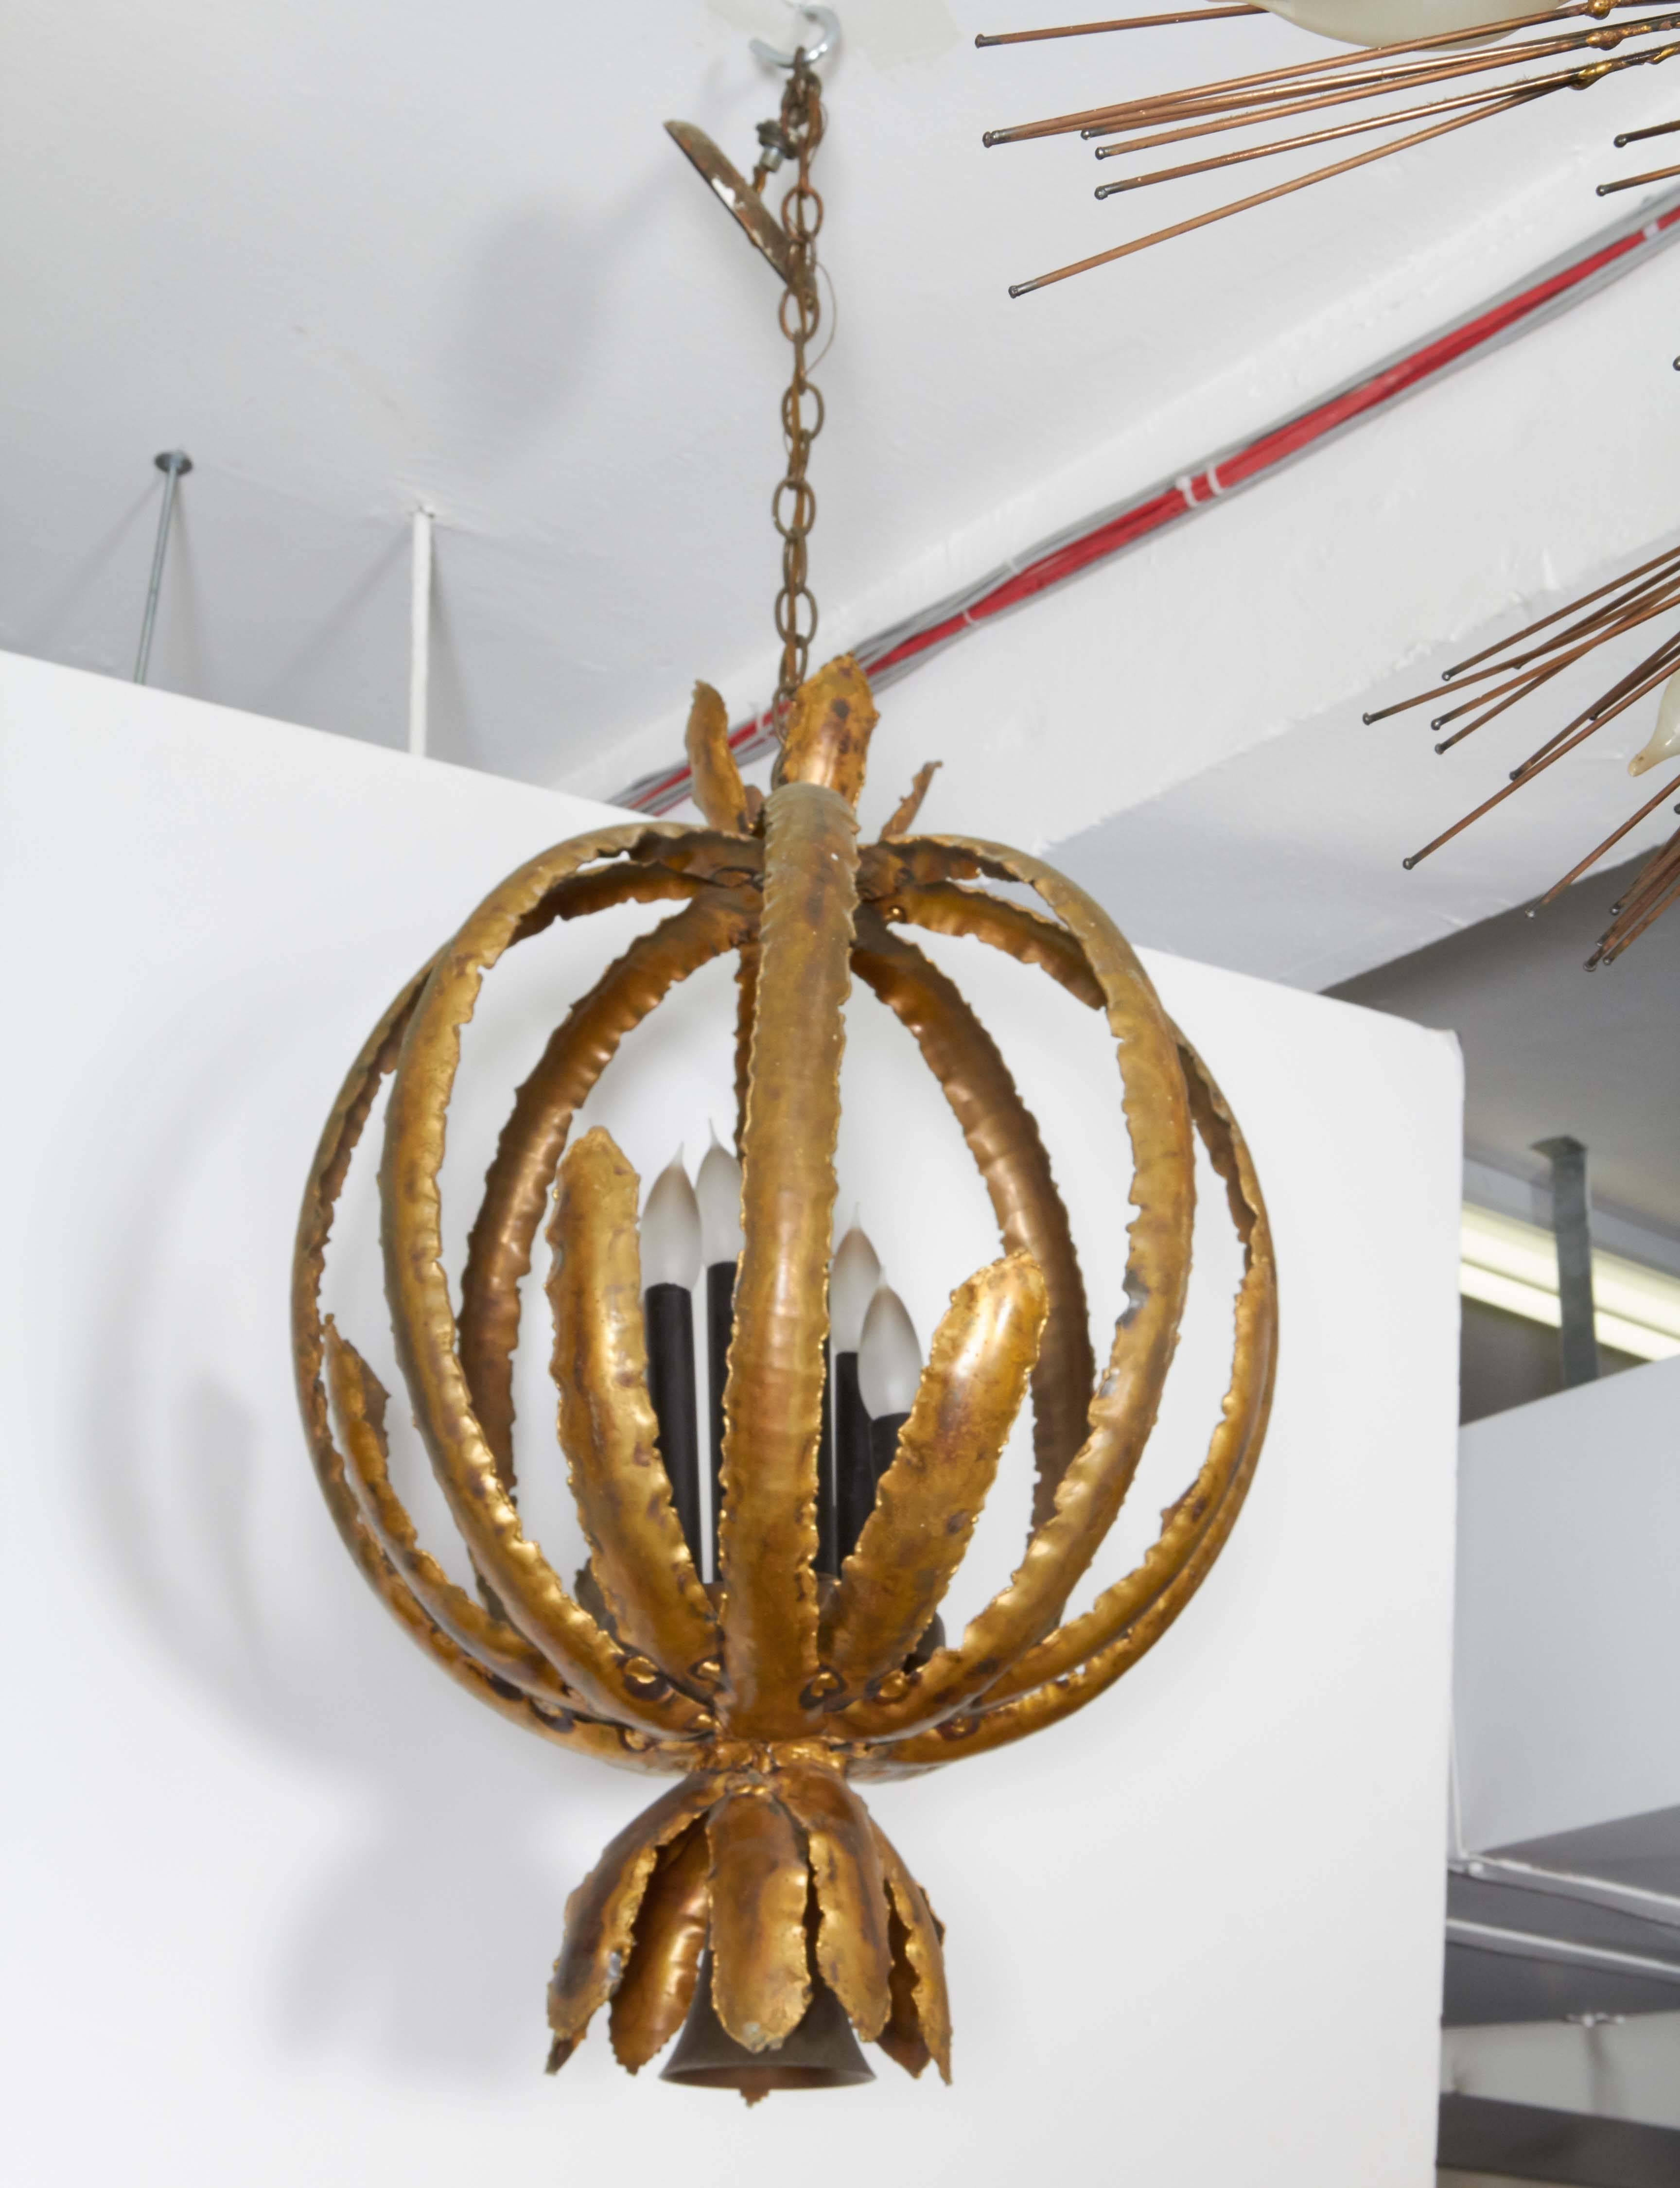 A Brutalist style chandelier by Tom Greene, manufactured by Feldman Lighting circa 1970s, with sheets of torch cut and soldered enameled metal, formed into a pod shape, surrounding six staggered lights. Dimensions provided reflect body. Very good